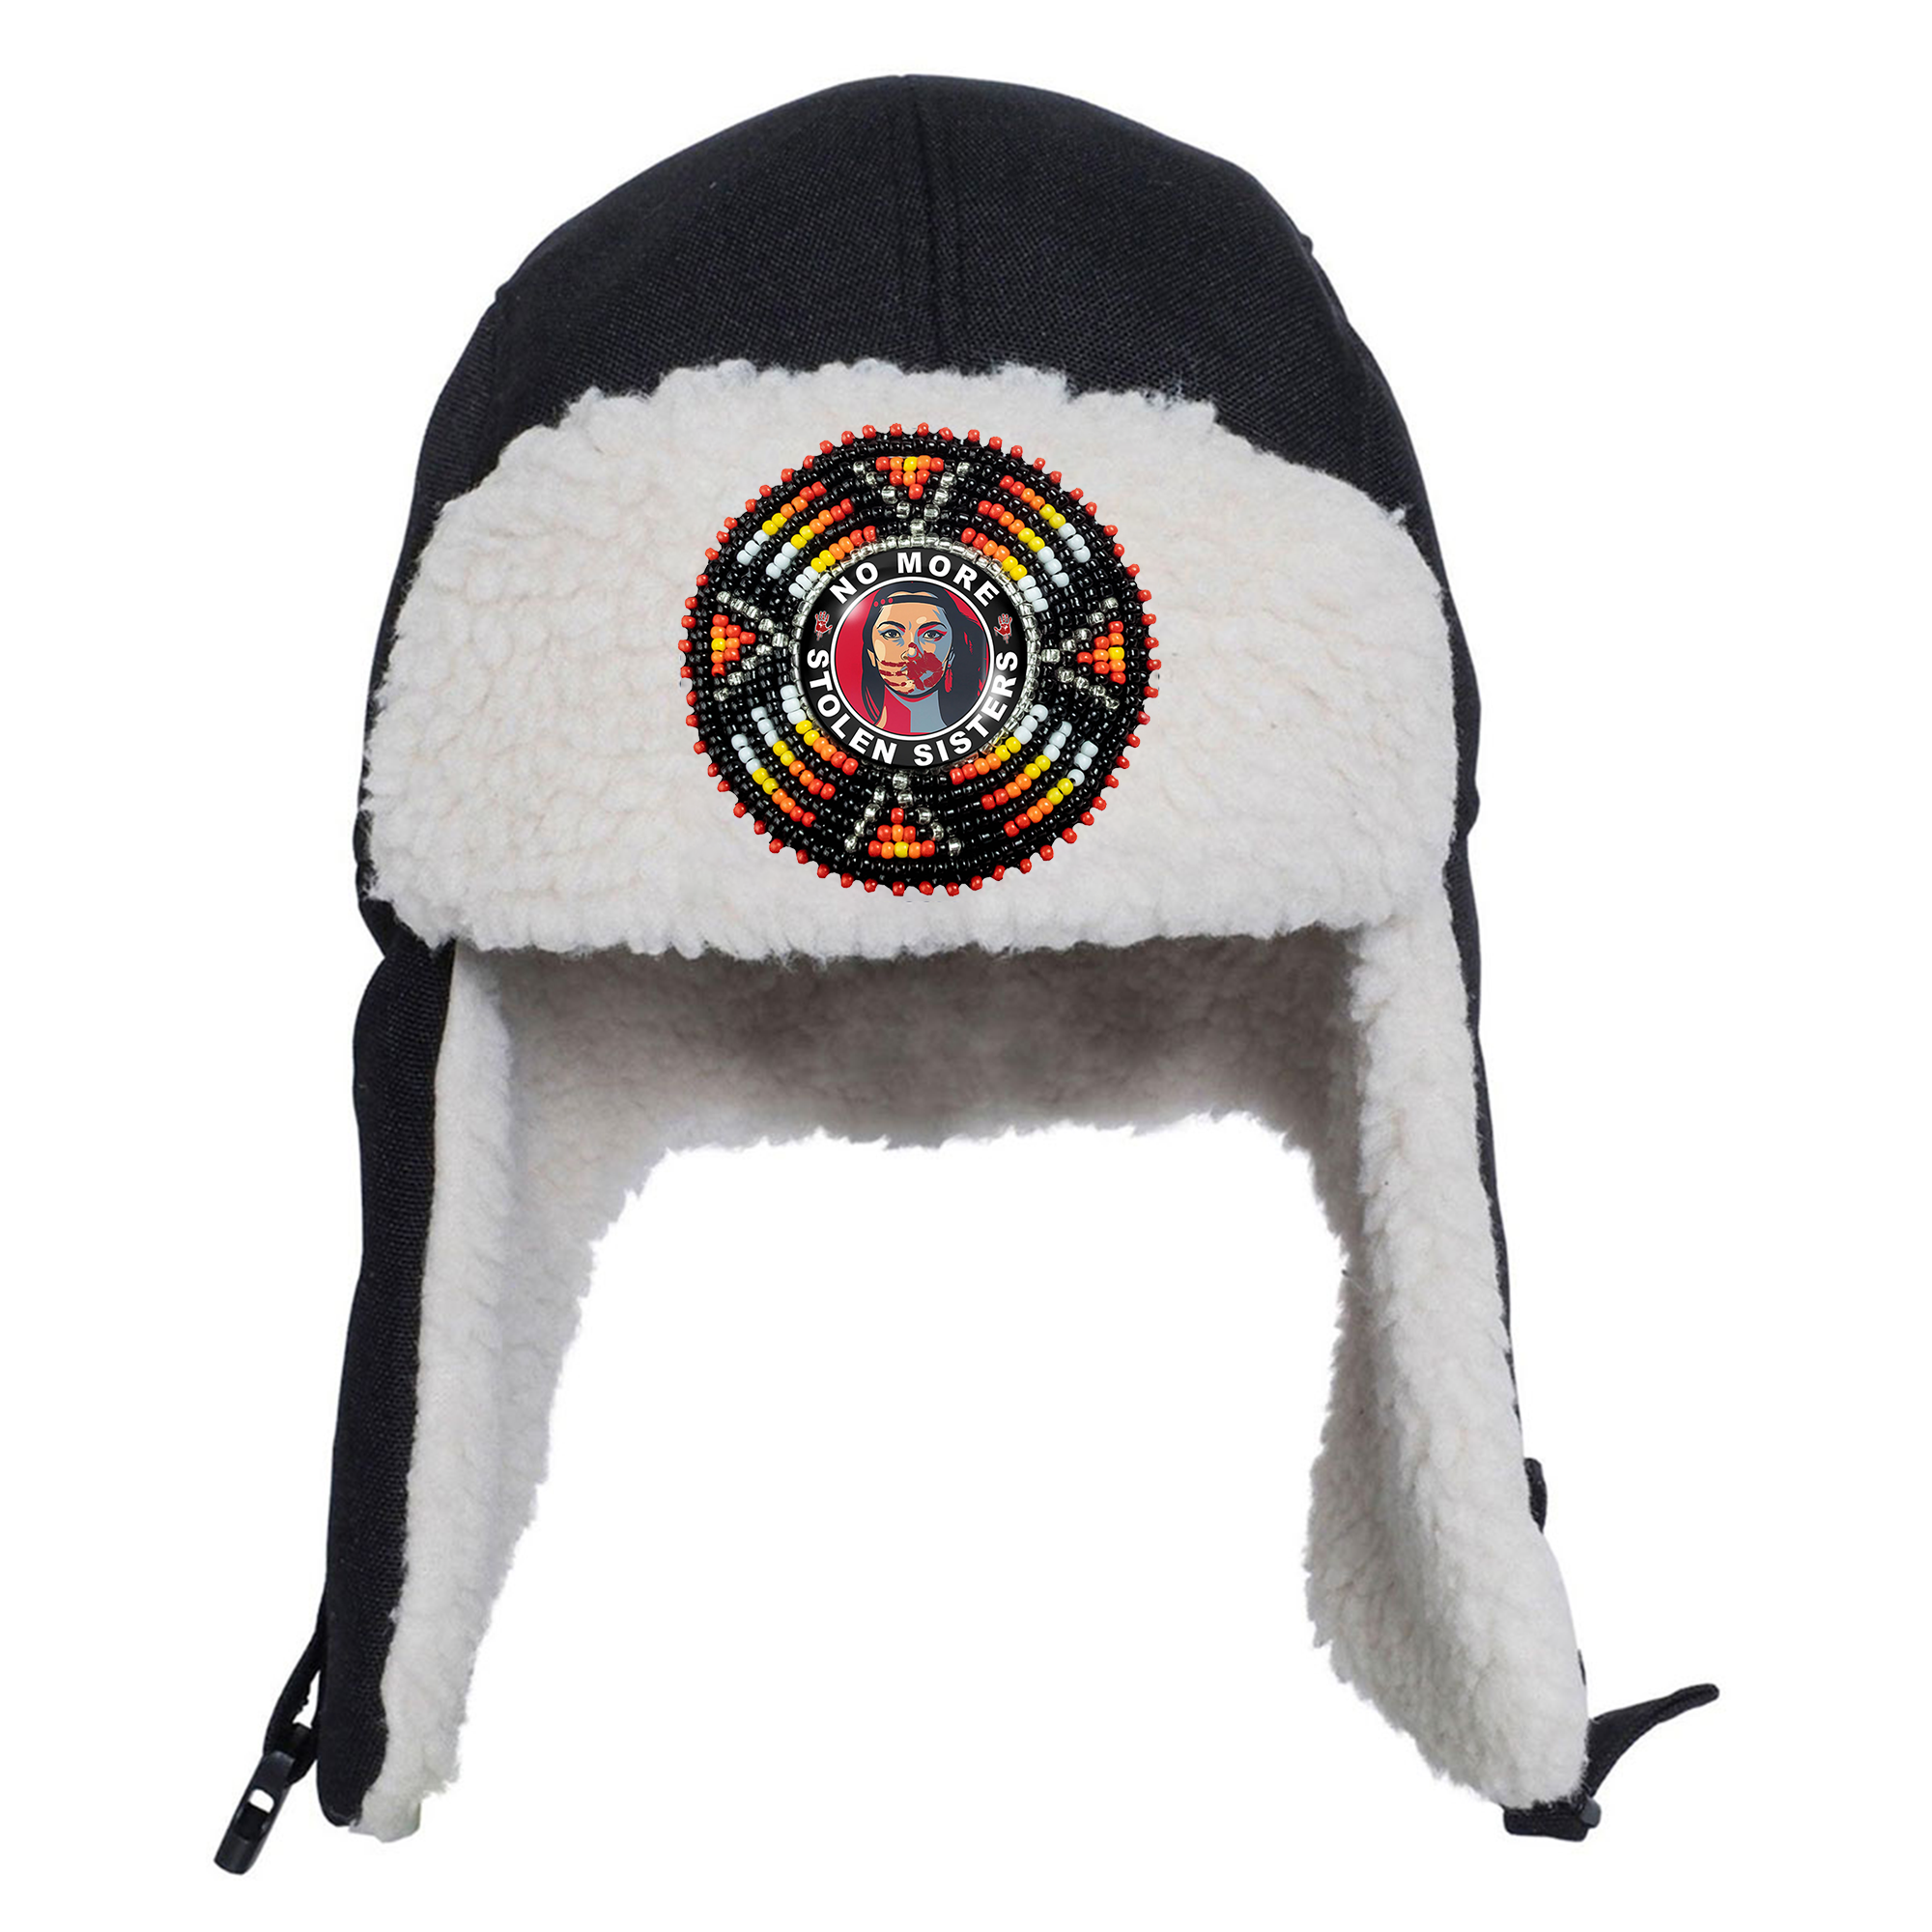 SALE 50% OFF - No More Stolen Sister Beaded Winter Trapper Hats For Men Women Native American Style